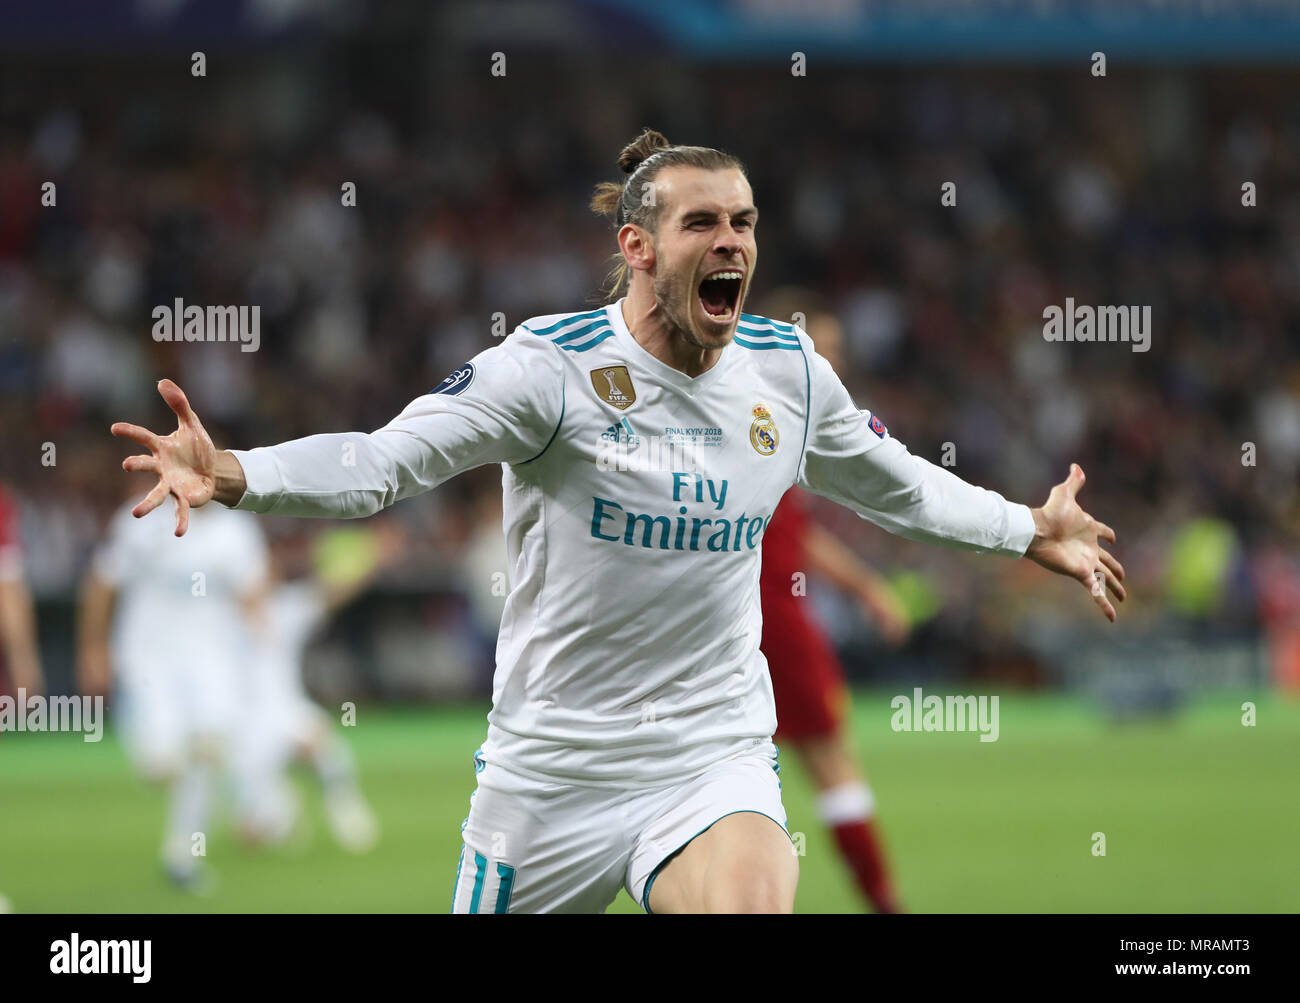 Kiev, Ukraine. 22nd Mar, 2018. Real Madrid's GARETH BALE reacts after scoring a goal during the UEFA Champions League final soccer match Real Madrid vs Liverpool FC, at the NSC Olimpiyskiy stadium in Kiev on 26 May 2018. Credit: Serg Glovny/ZUMA Wire/Alamy Live News Stock Photo